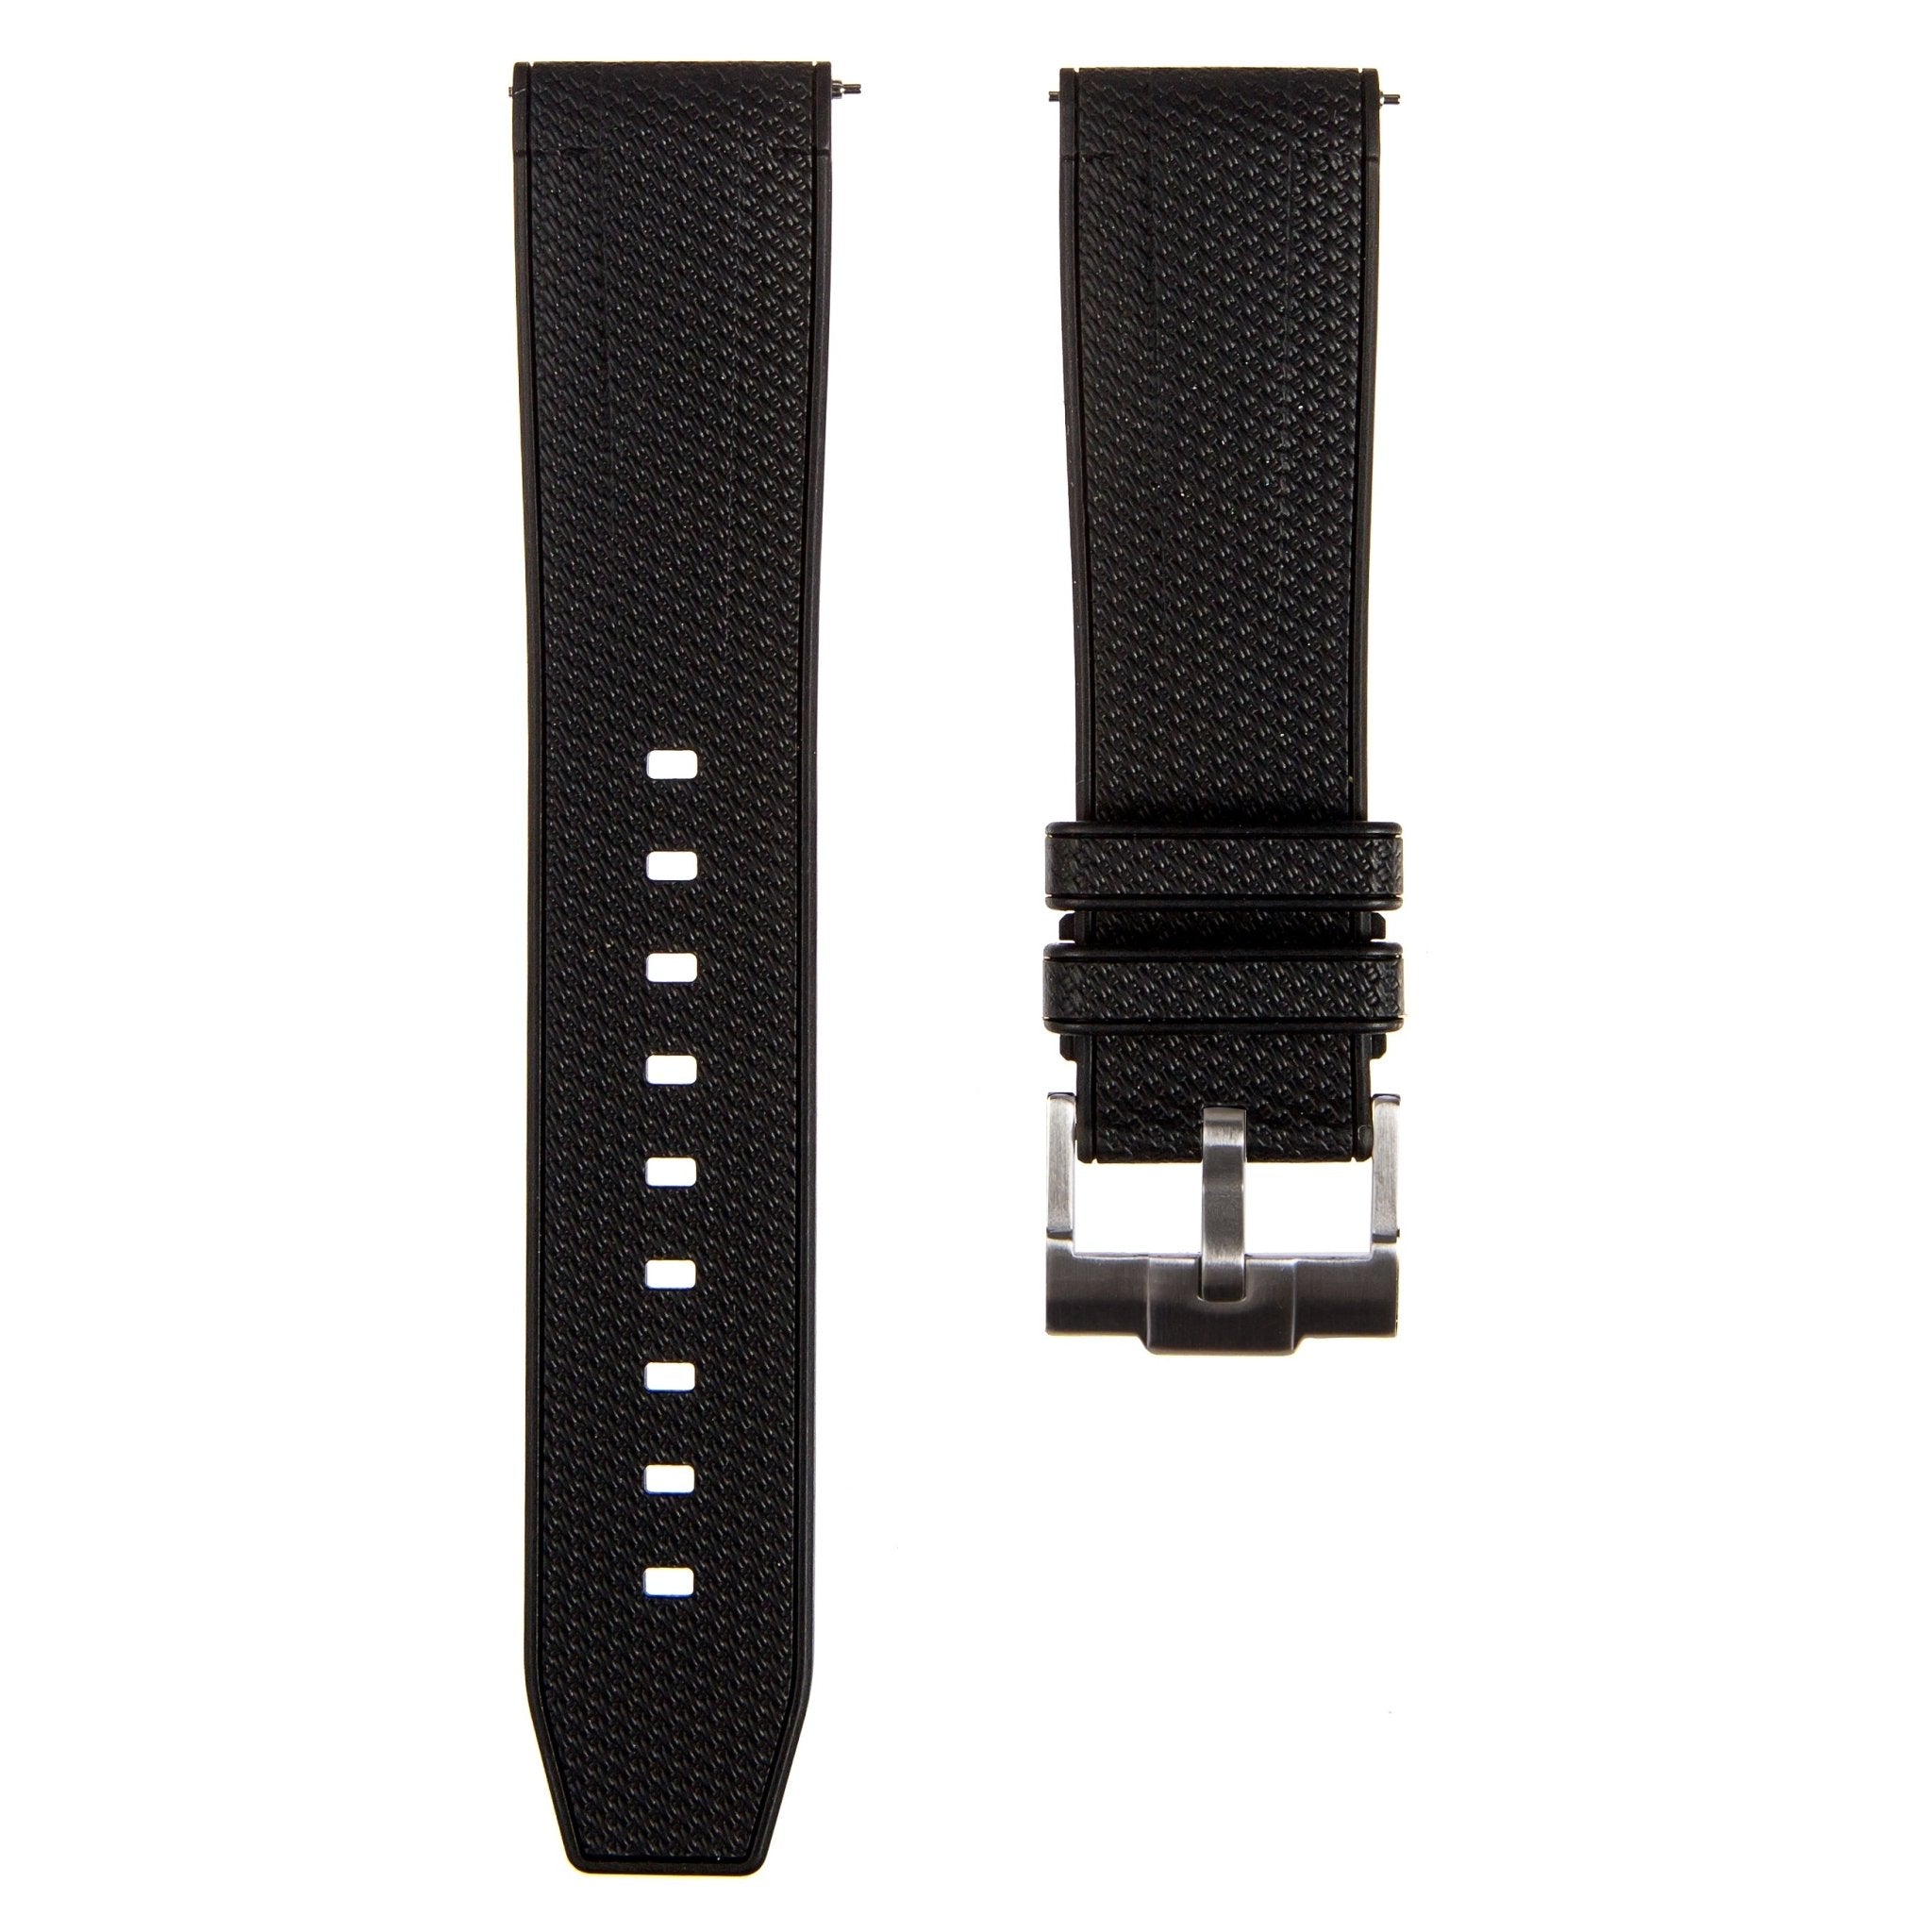 Flexweave Premium SIlicone Rubber Strap - Quick-Release - Compatible with Omega Moonwatch – Black (2423) -Strapseeker